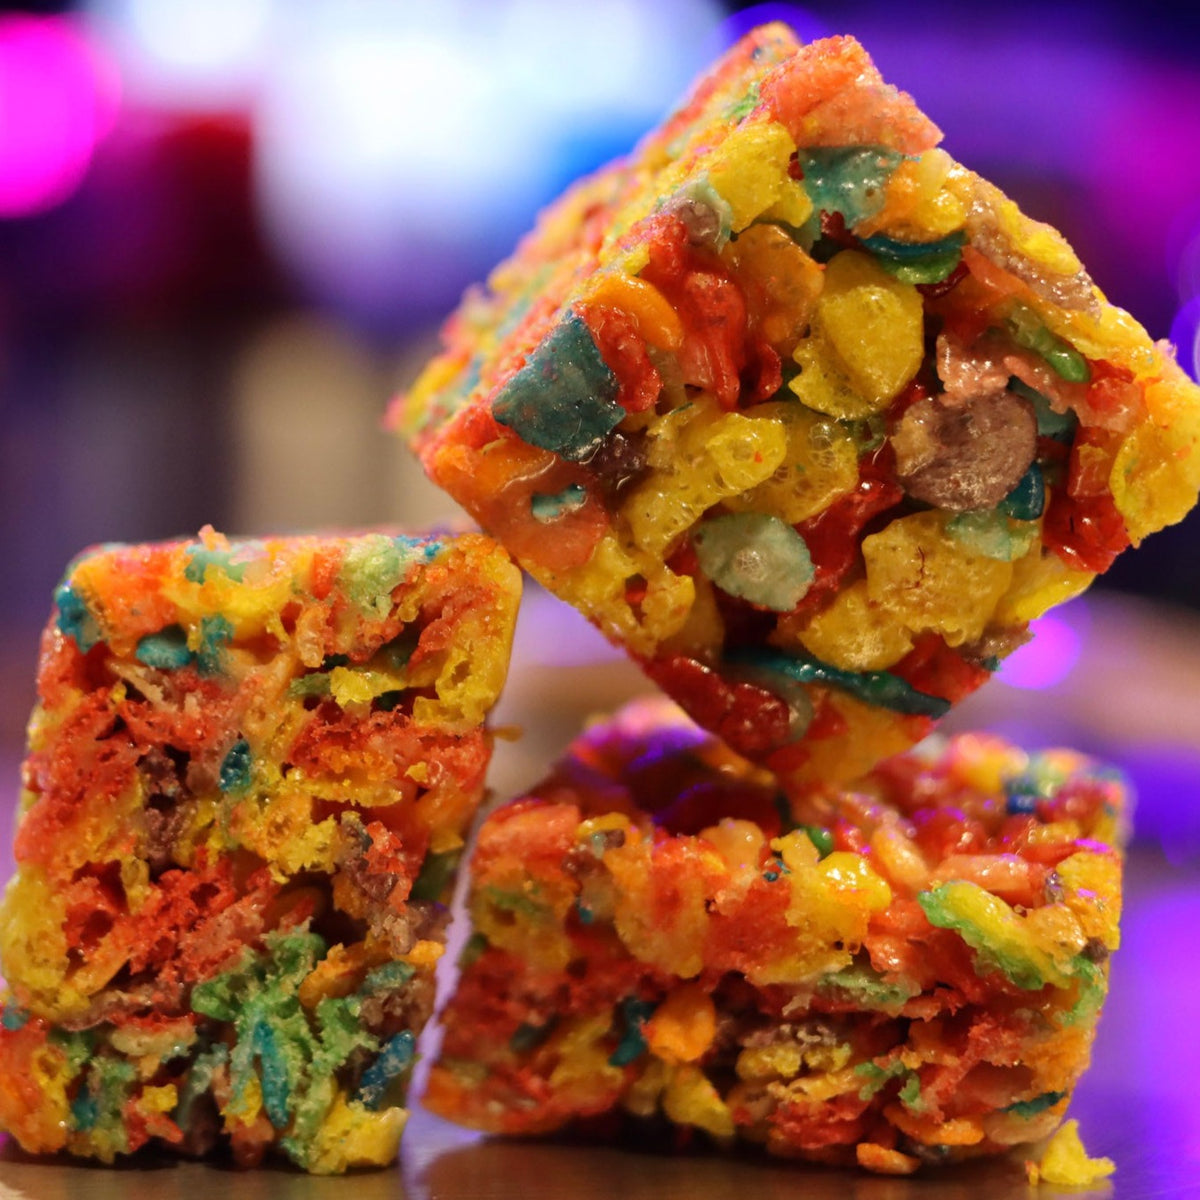 Infused Fruity Pebbles Treat